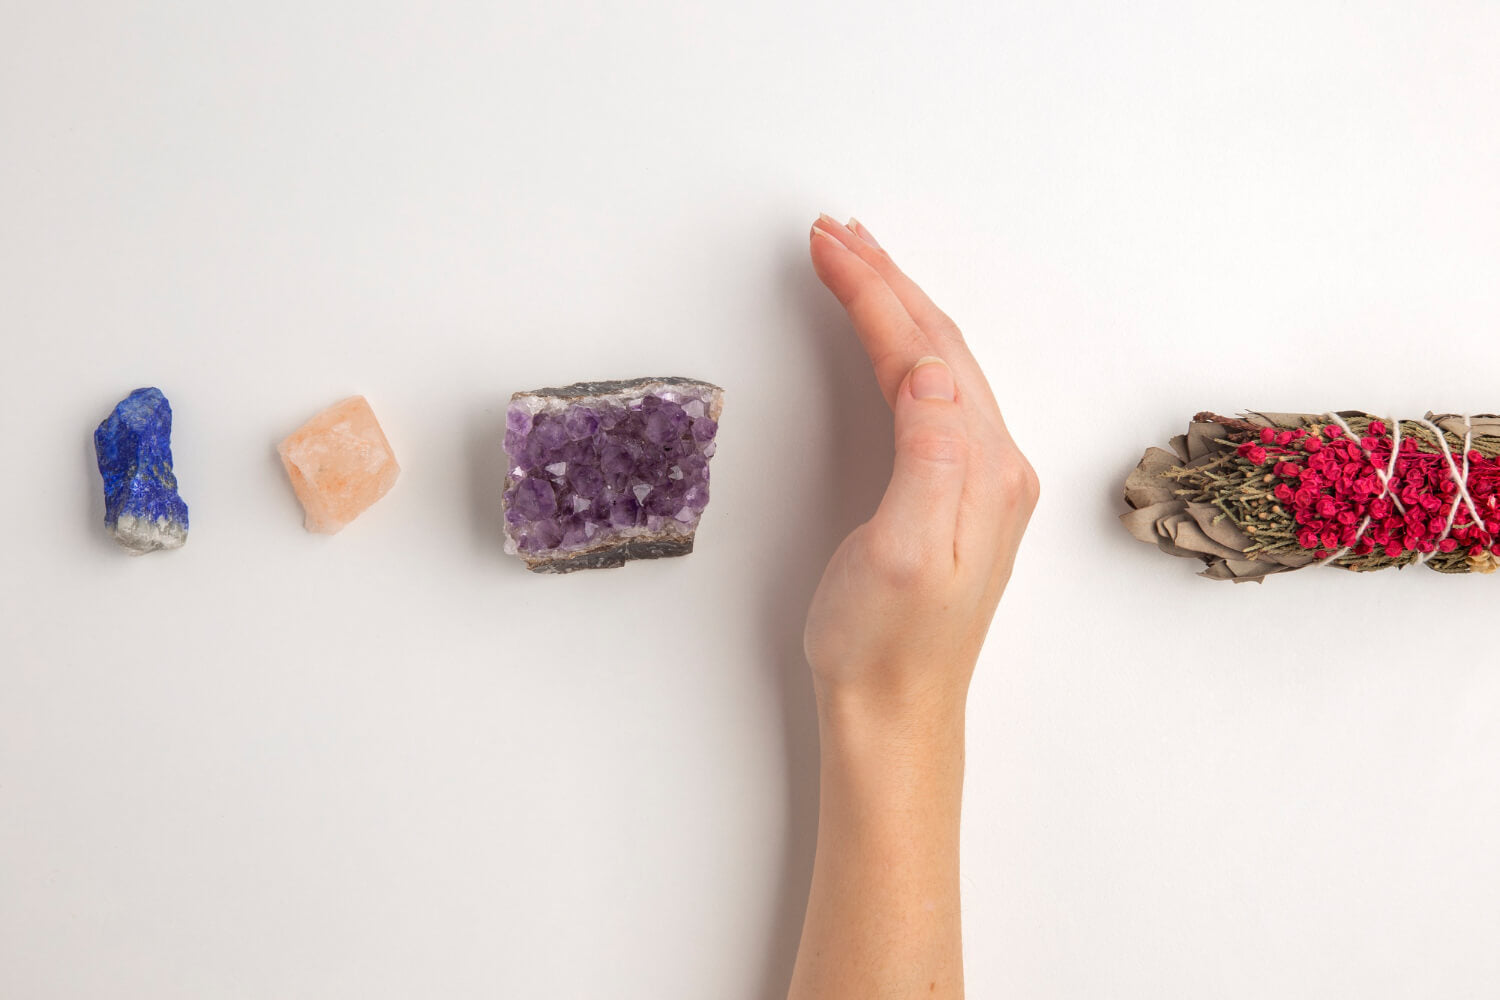 How to Use and Care for Your Astrological Gemstones